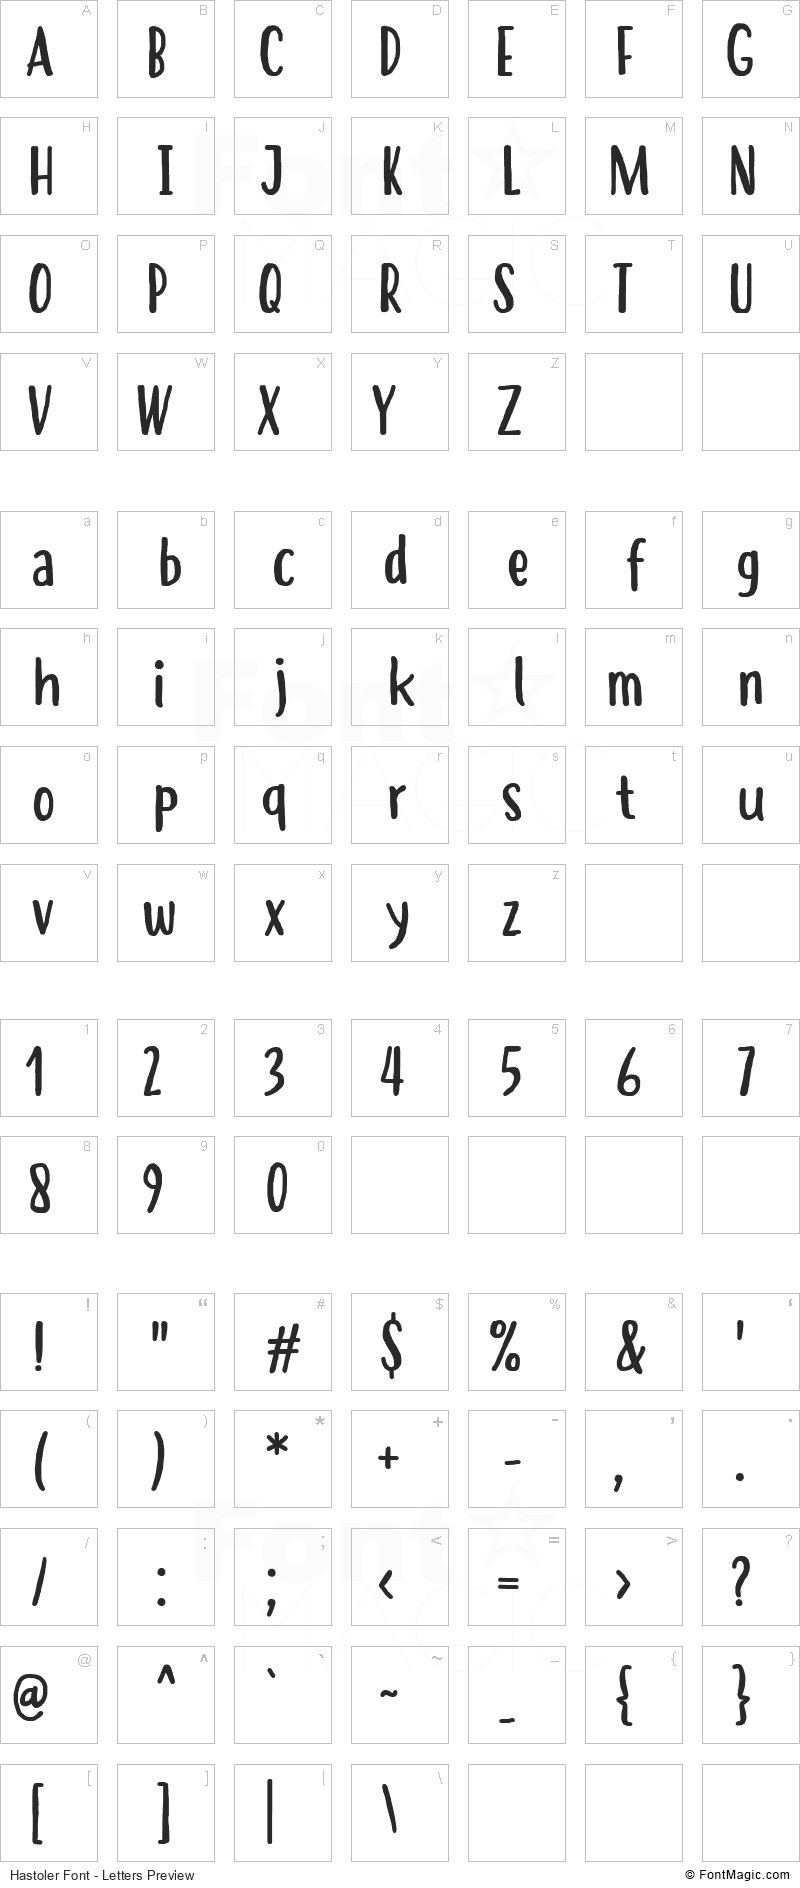 Hastoler Font - All Latters Preview Chart